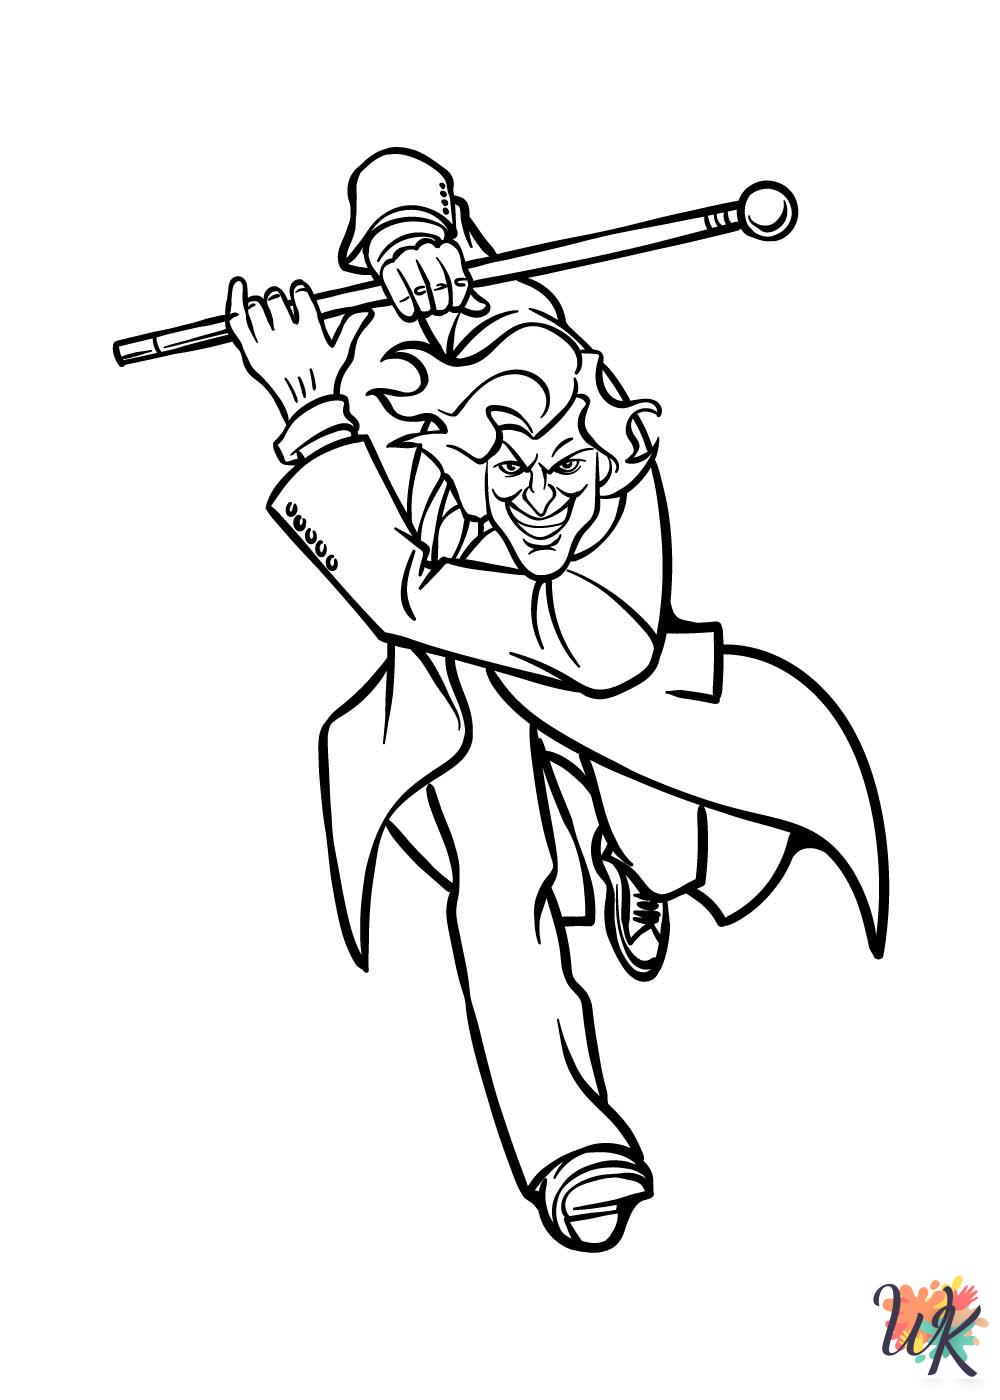 Joker coloring pages for adults easy